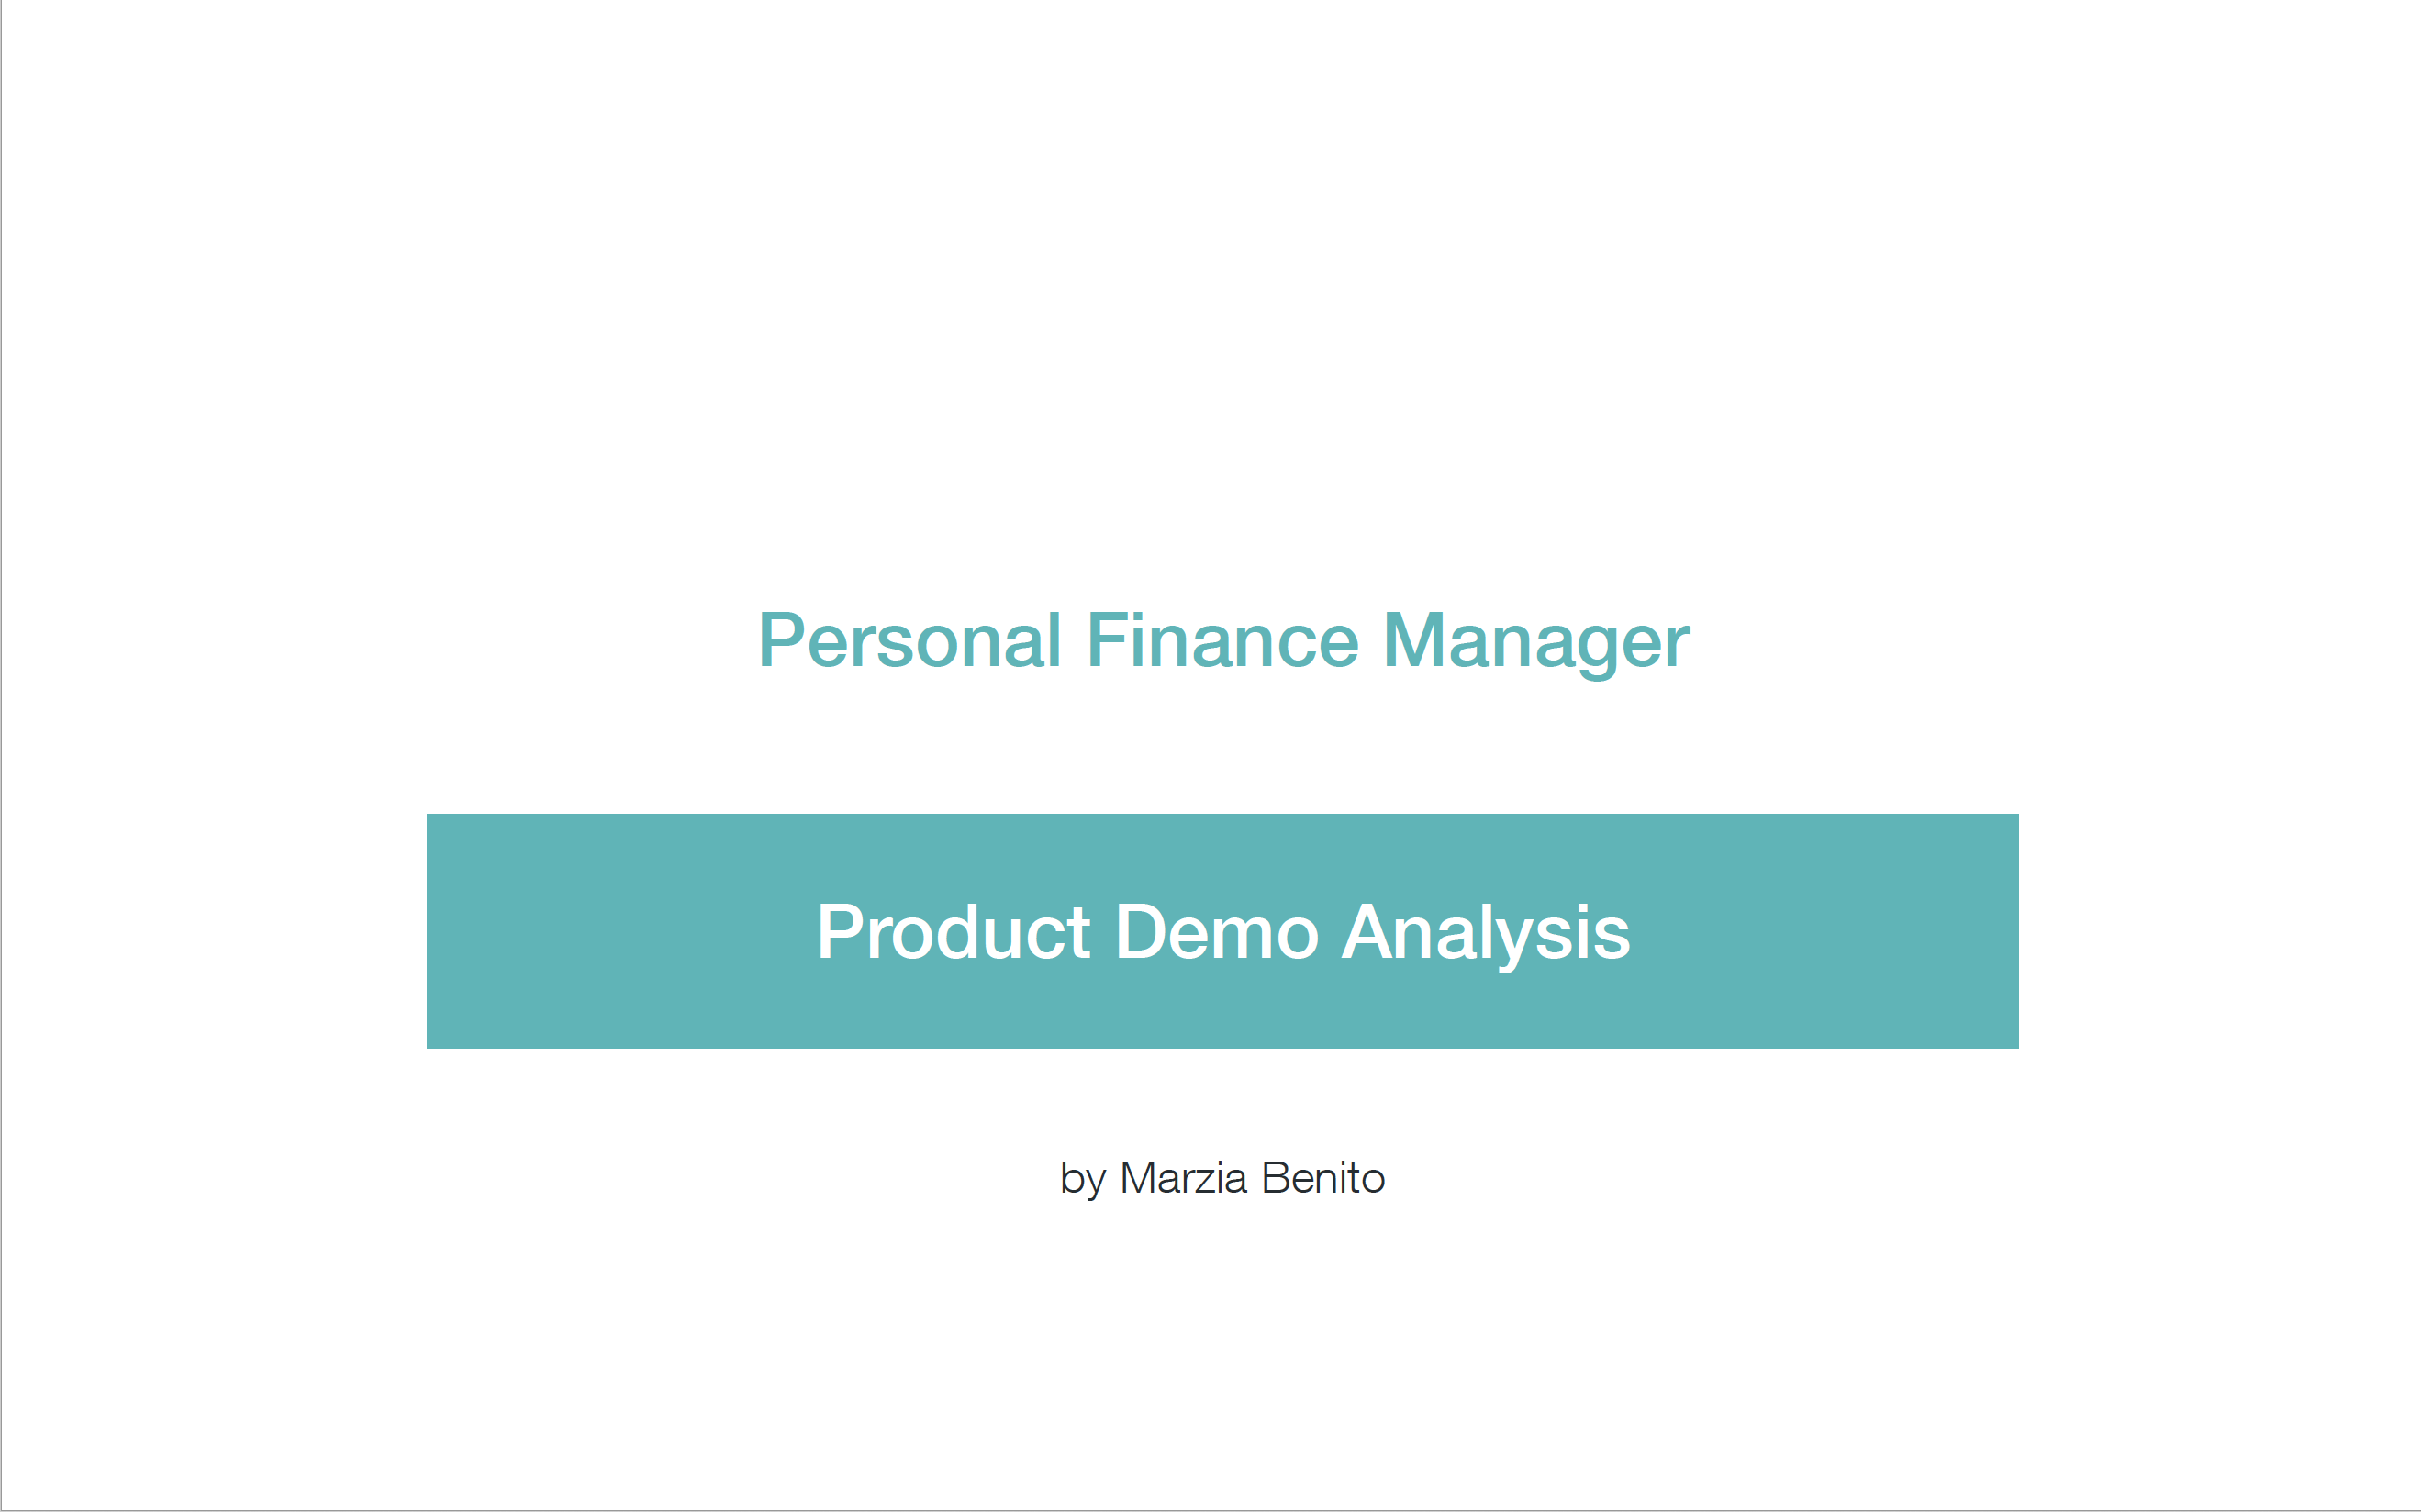 peronal finance manager app